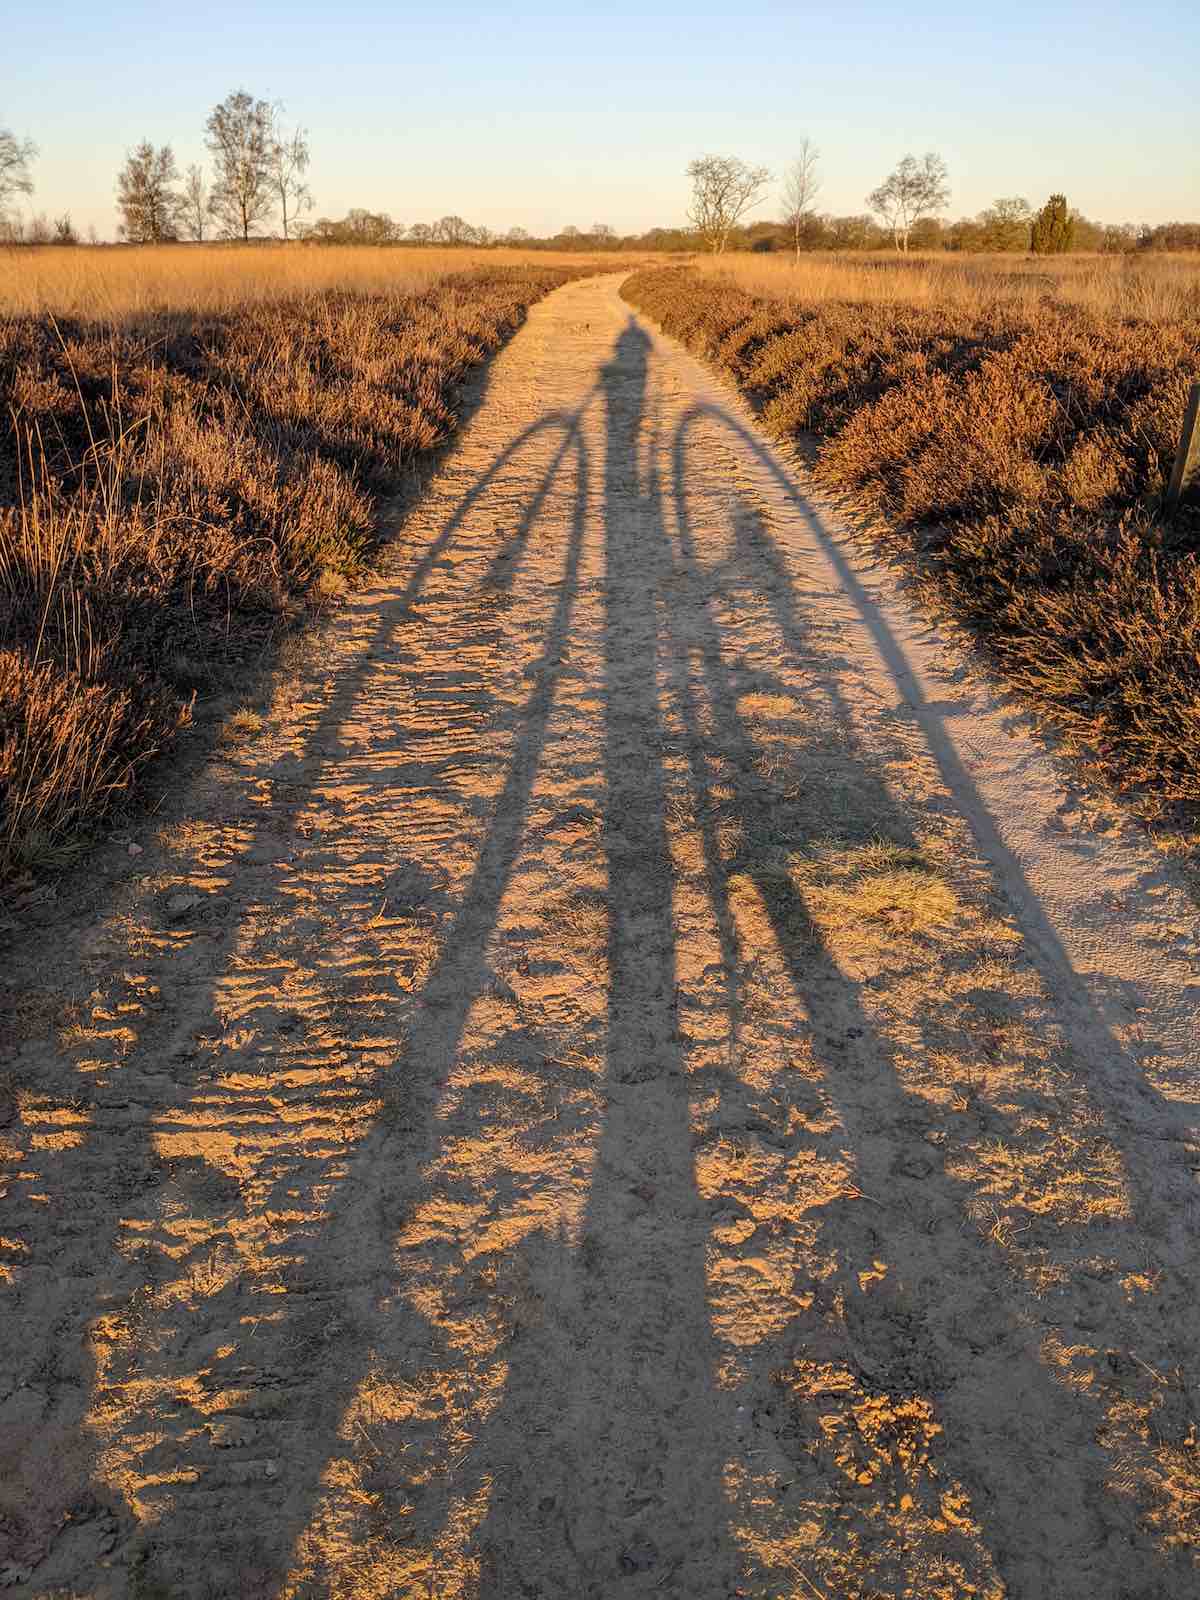 bikerumor pic of the day the shadow of a cyclist covers at dirt path running through a golden field, the sun is low and the sky is clear and pale blue.